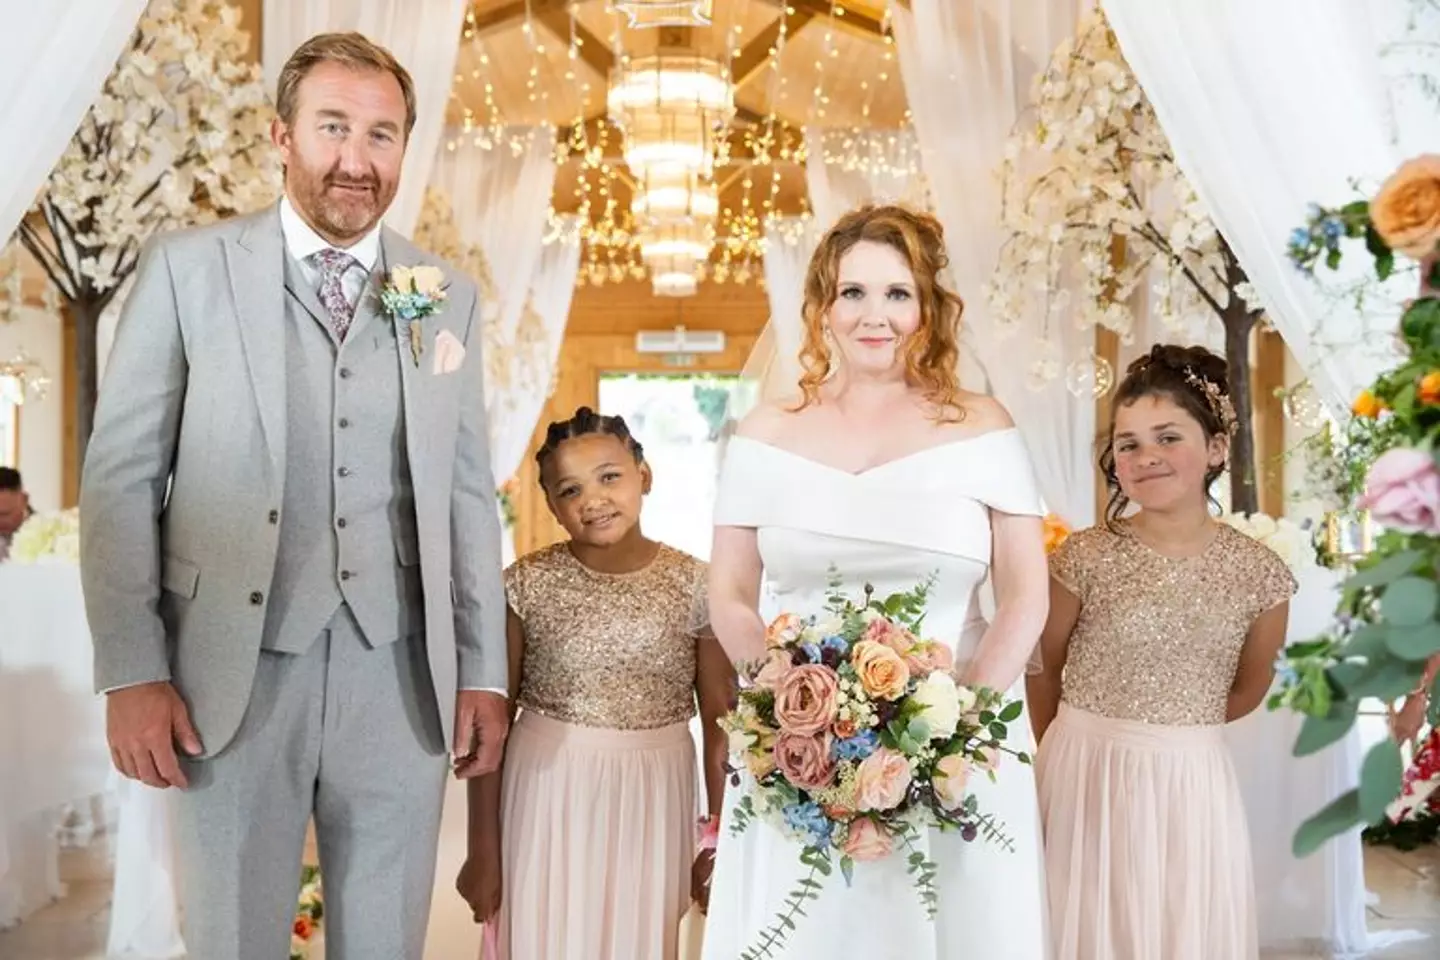 Corrie fans suspect Phill is up to no good as he gets set to marry Fiz.